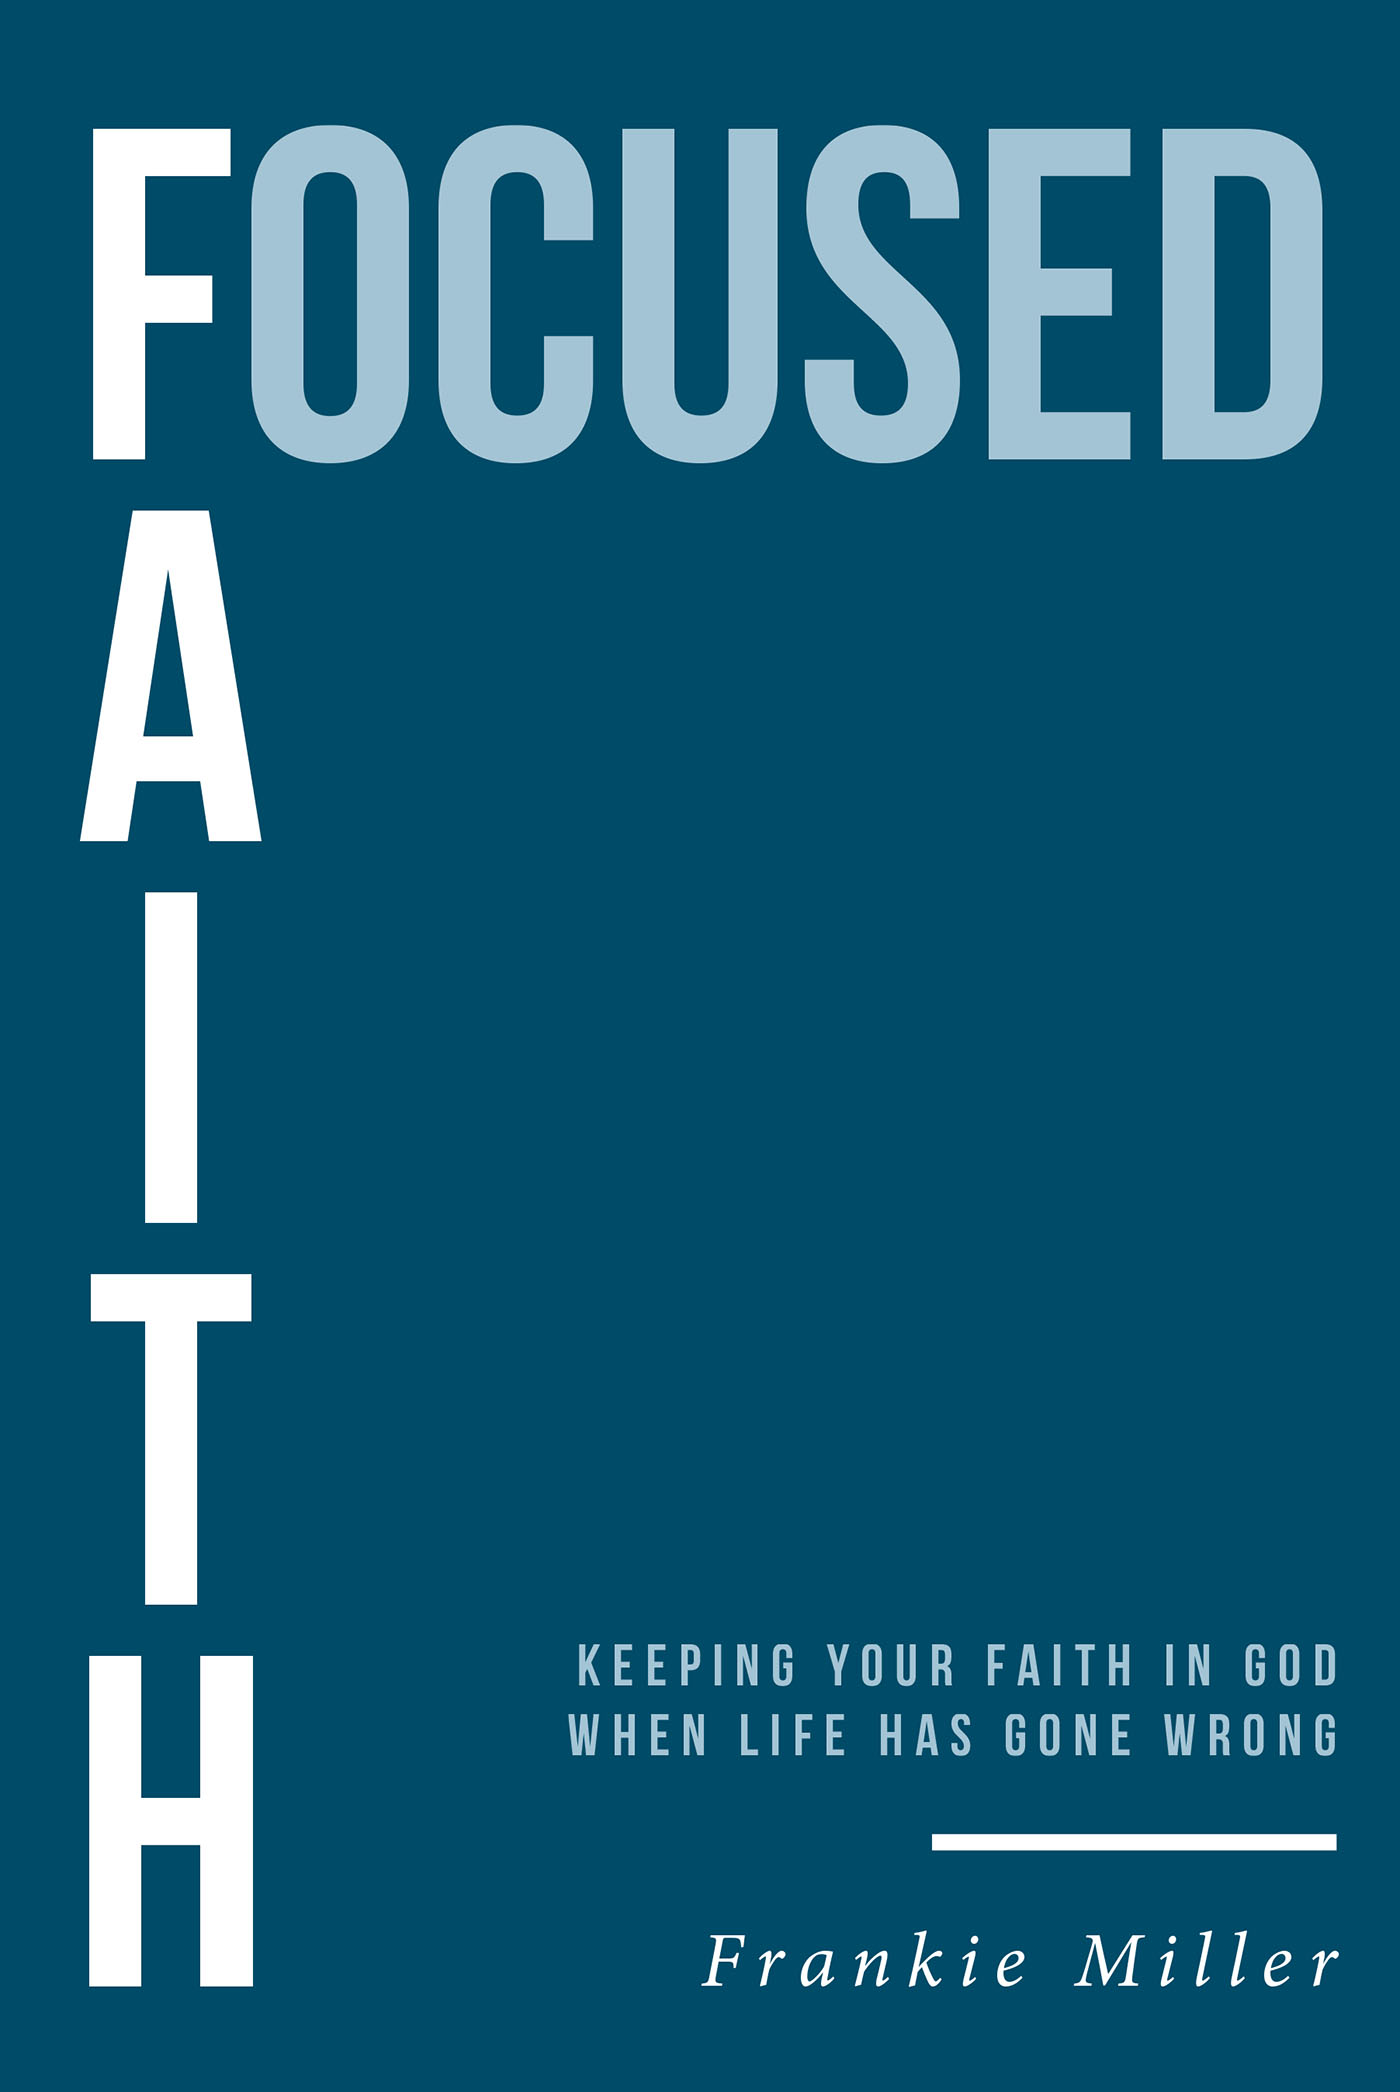 Frankie Miller’s Newly Released “Focused Faith: Keeping Your Faith In God When Life Has Gone Wrong” is a Message of Empowerment and Determination